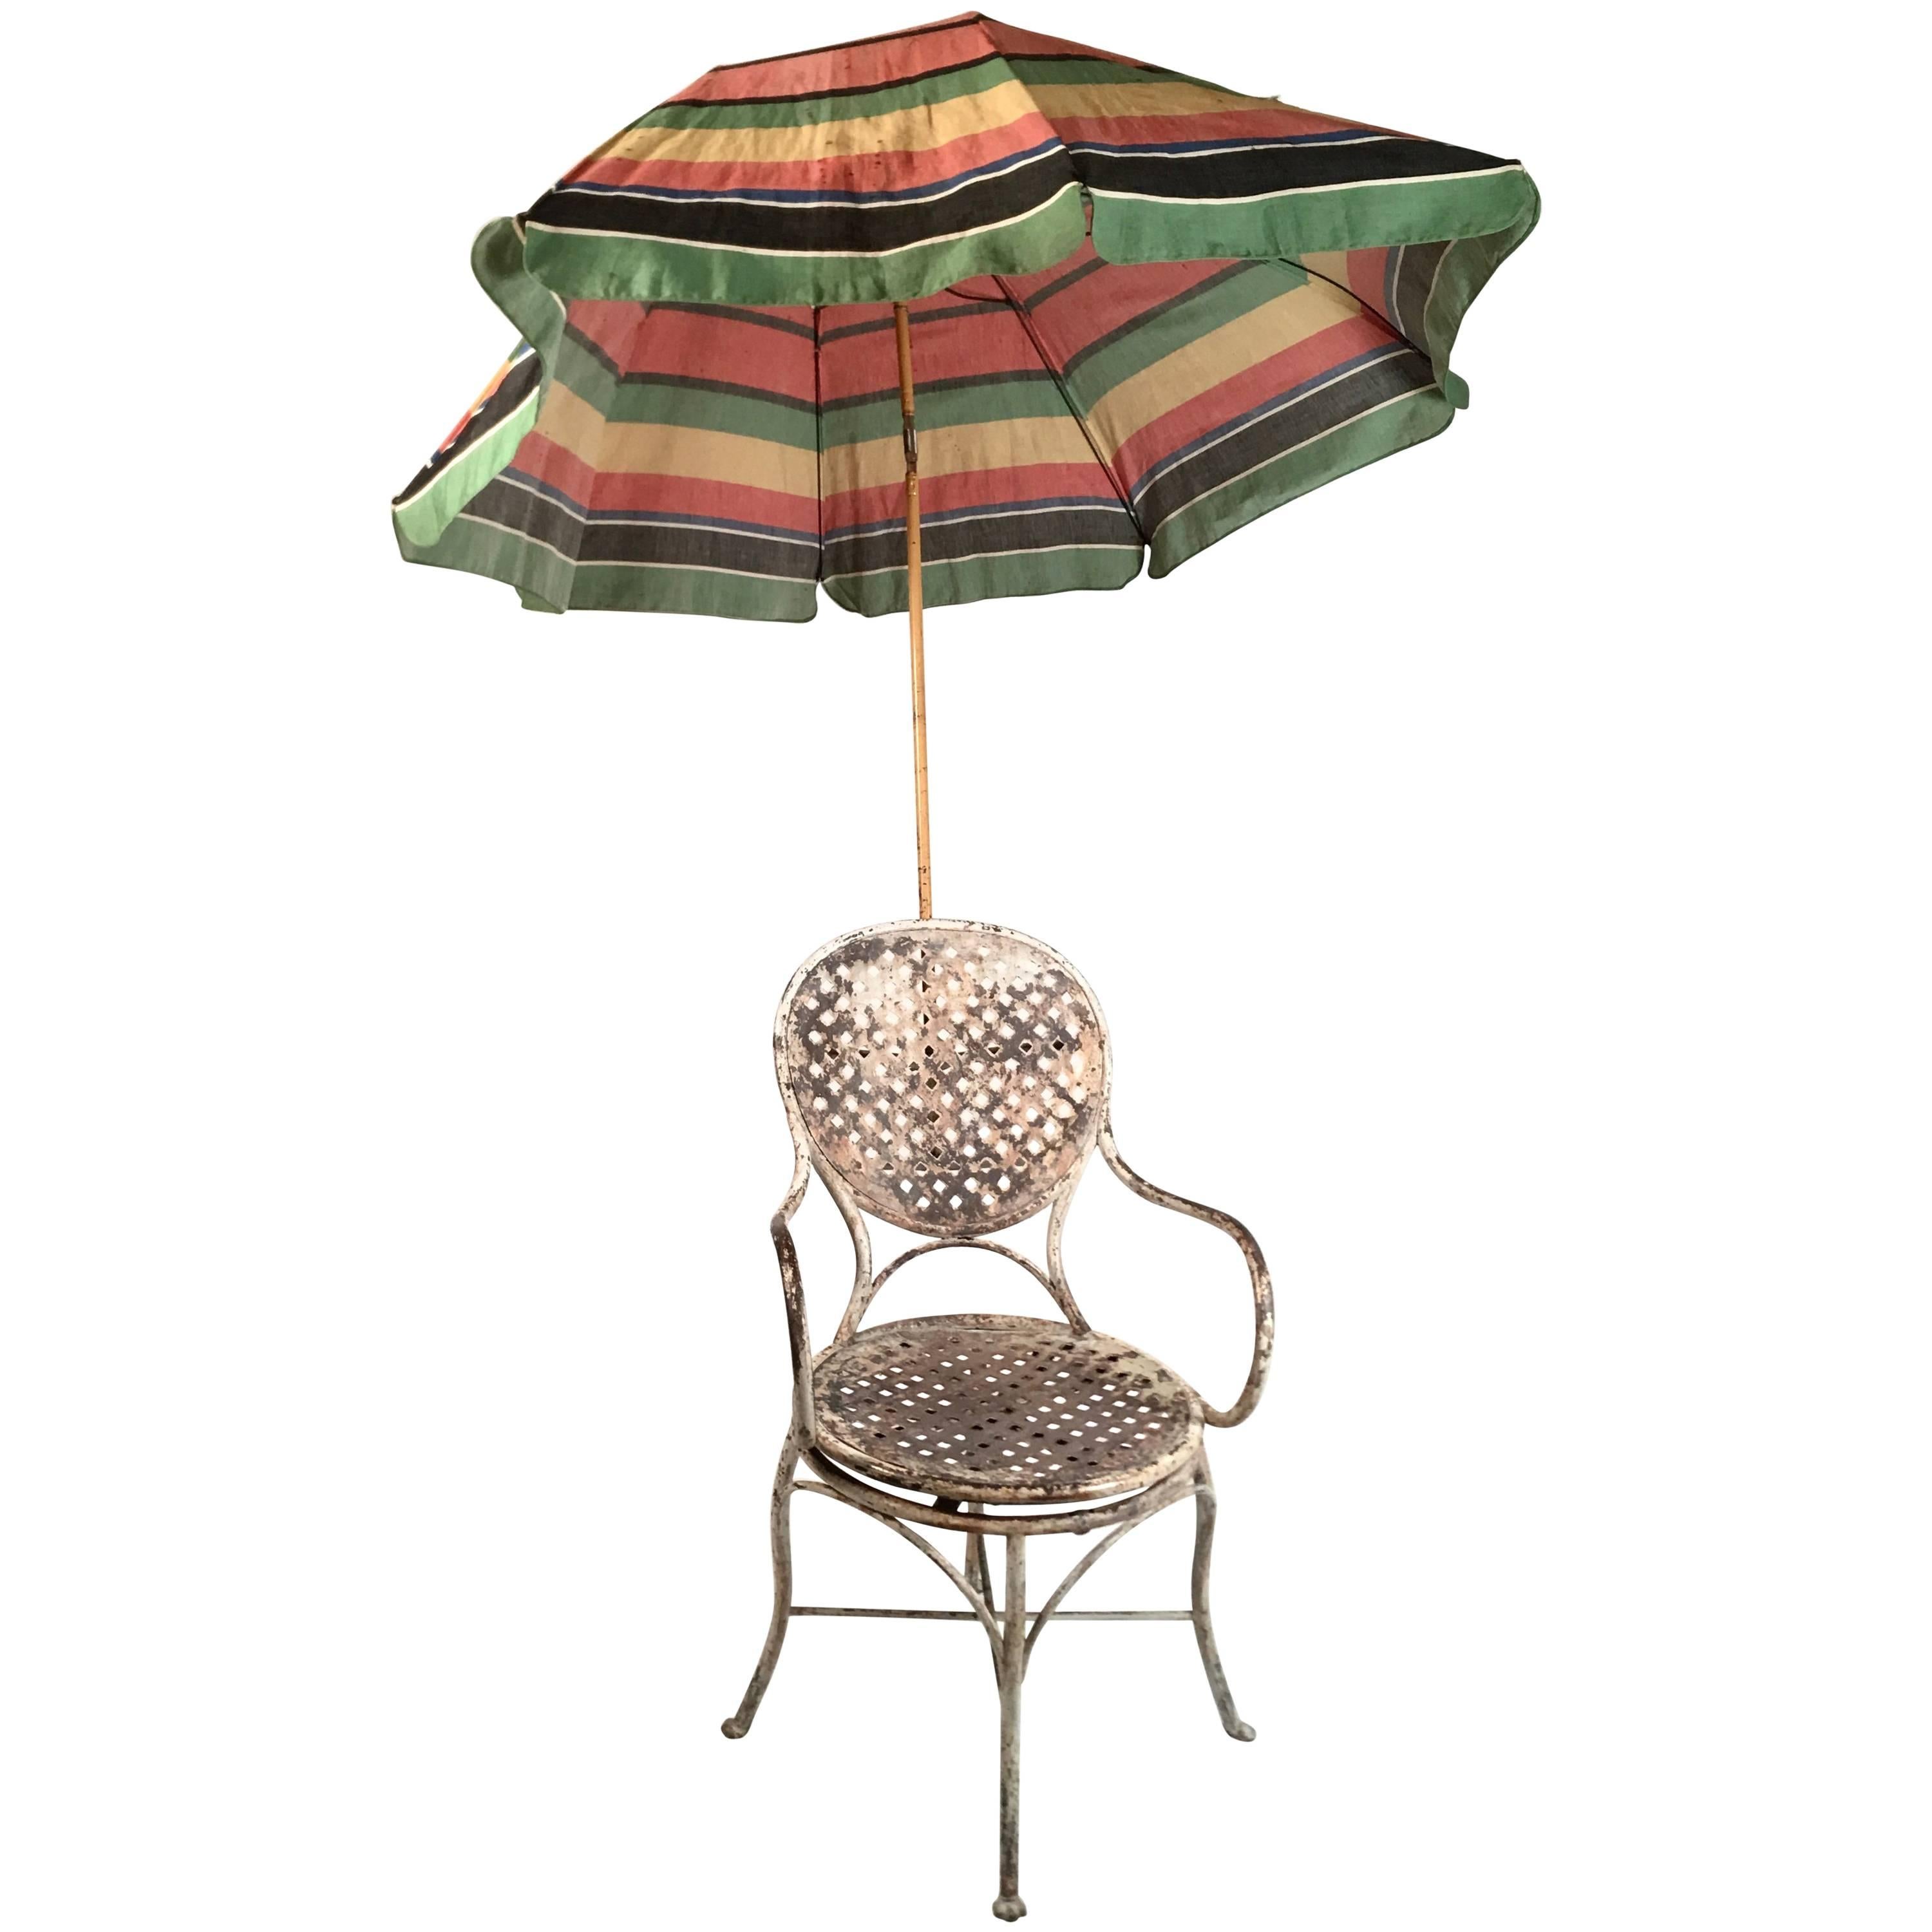 French  Iron Garden Chair with Adjustable and Removable Umbrella, circa 1920s